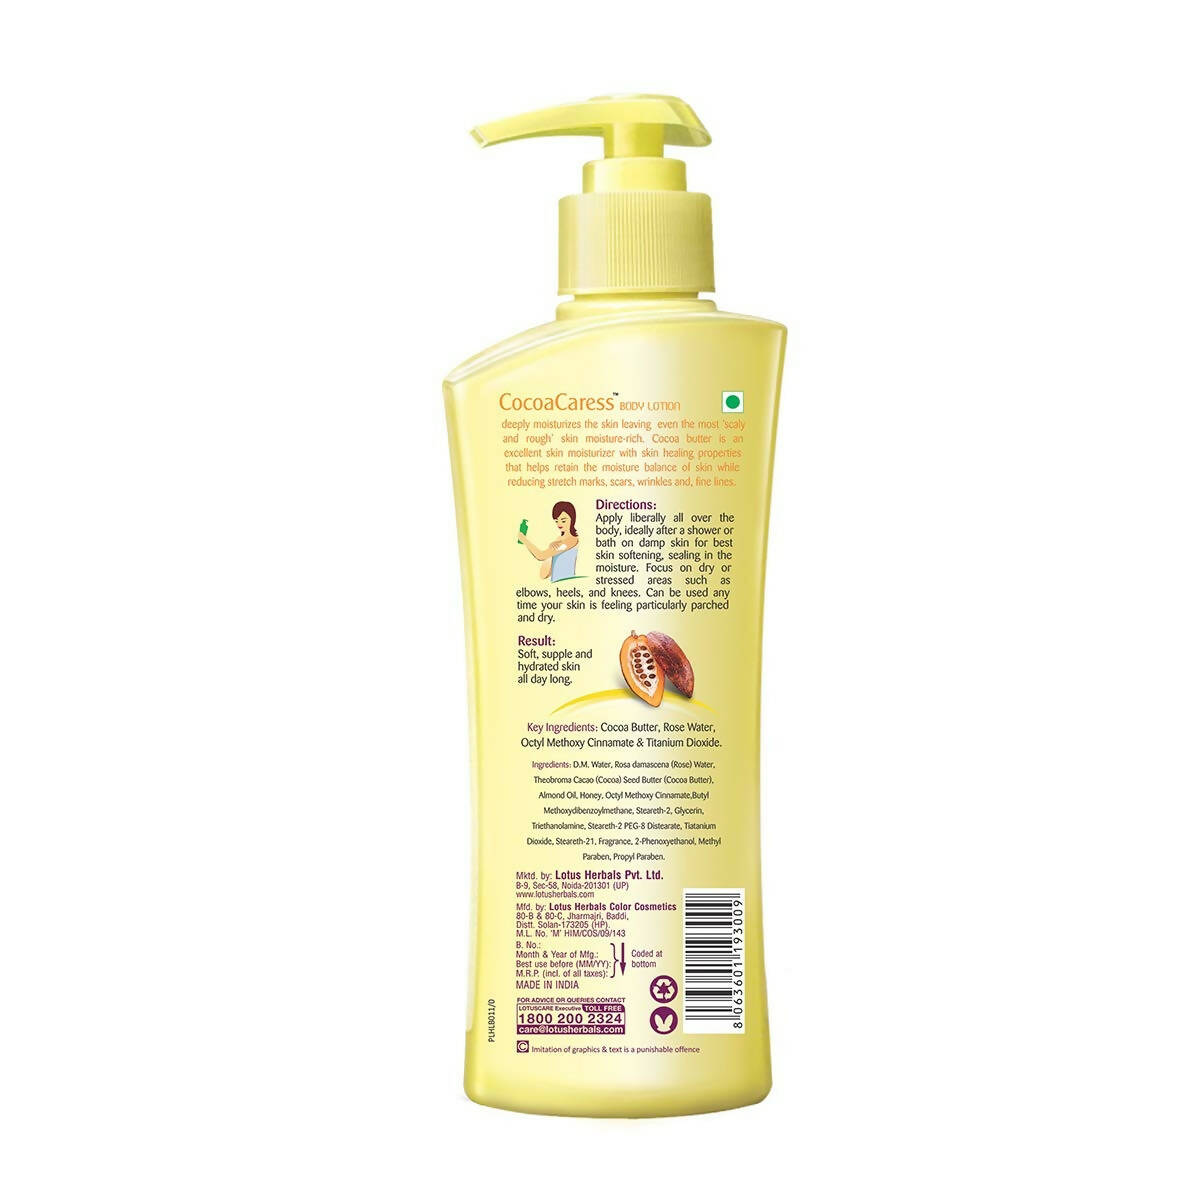 Lotus Herbals CocoaCaress Daily Hand & Body Lotion